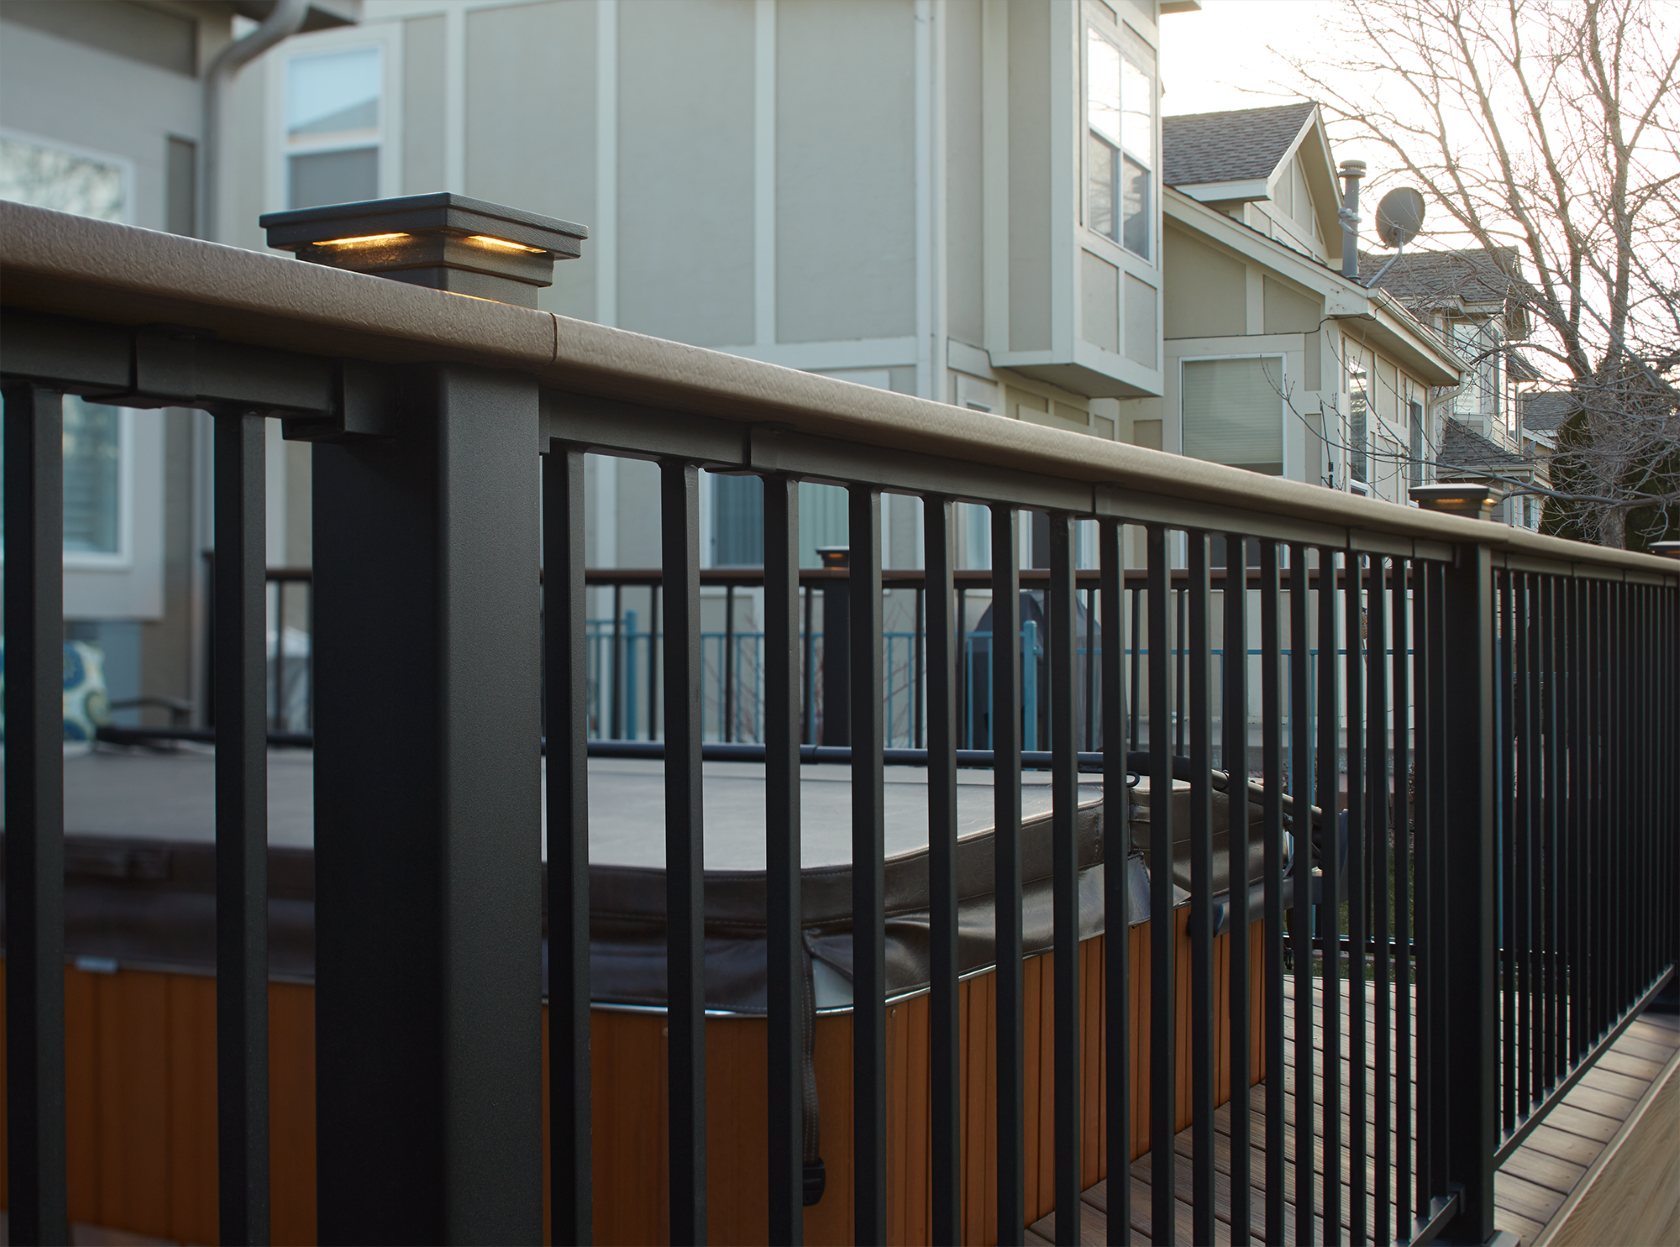 Modern deck post lights installed on railing, enhancing outdoor safety and visibility.